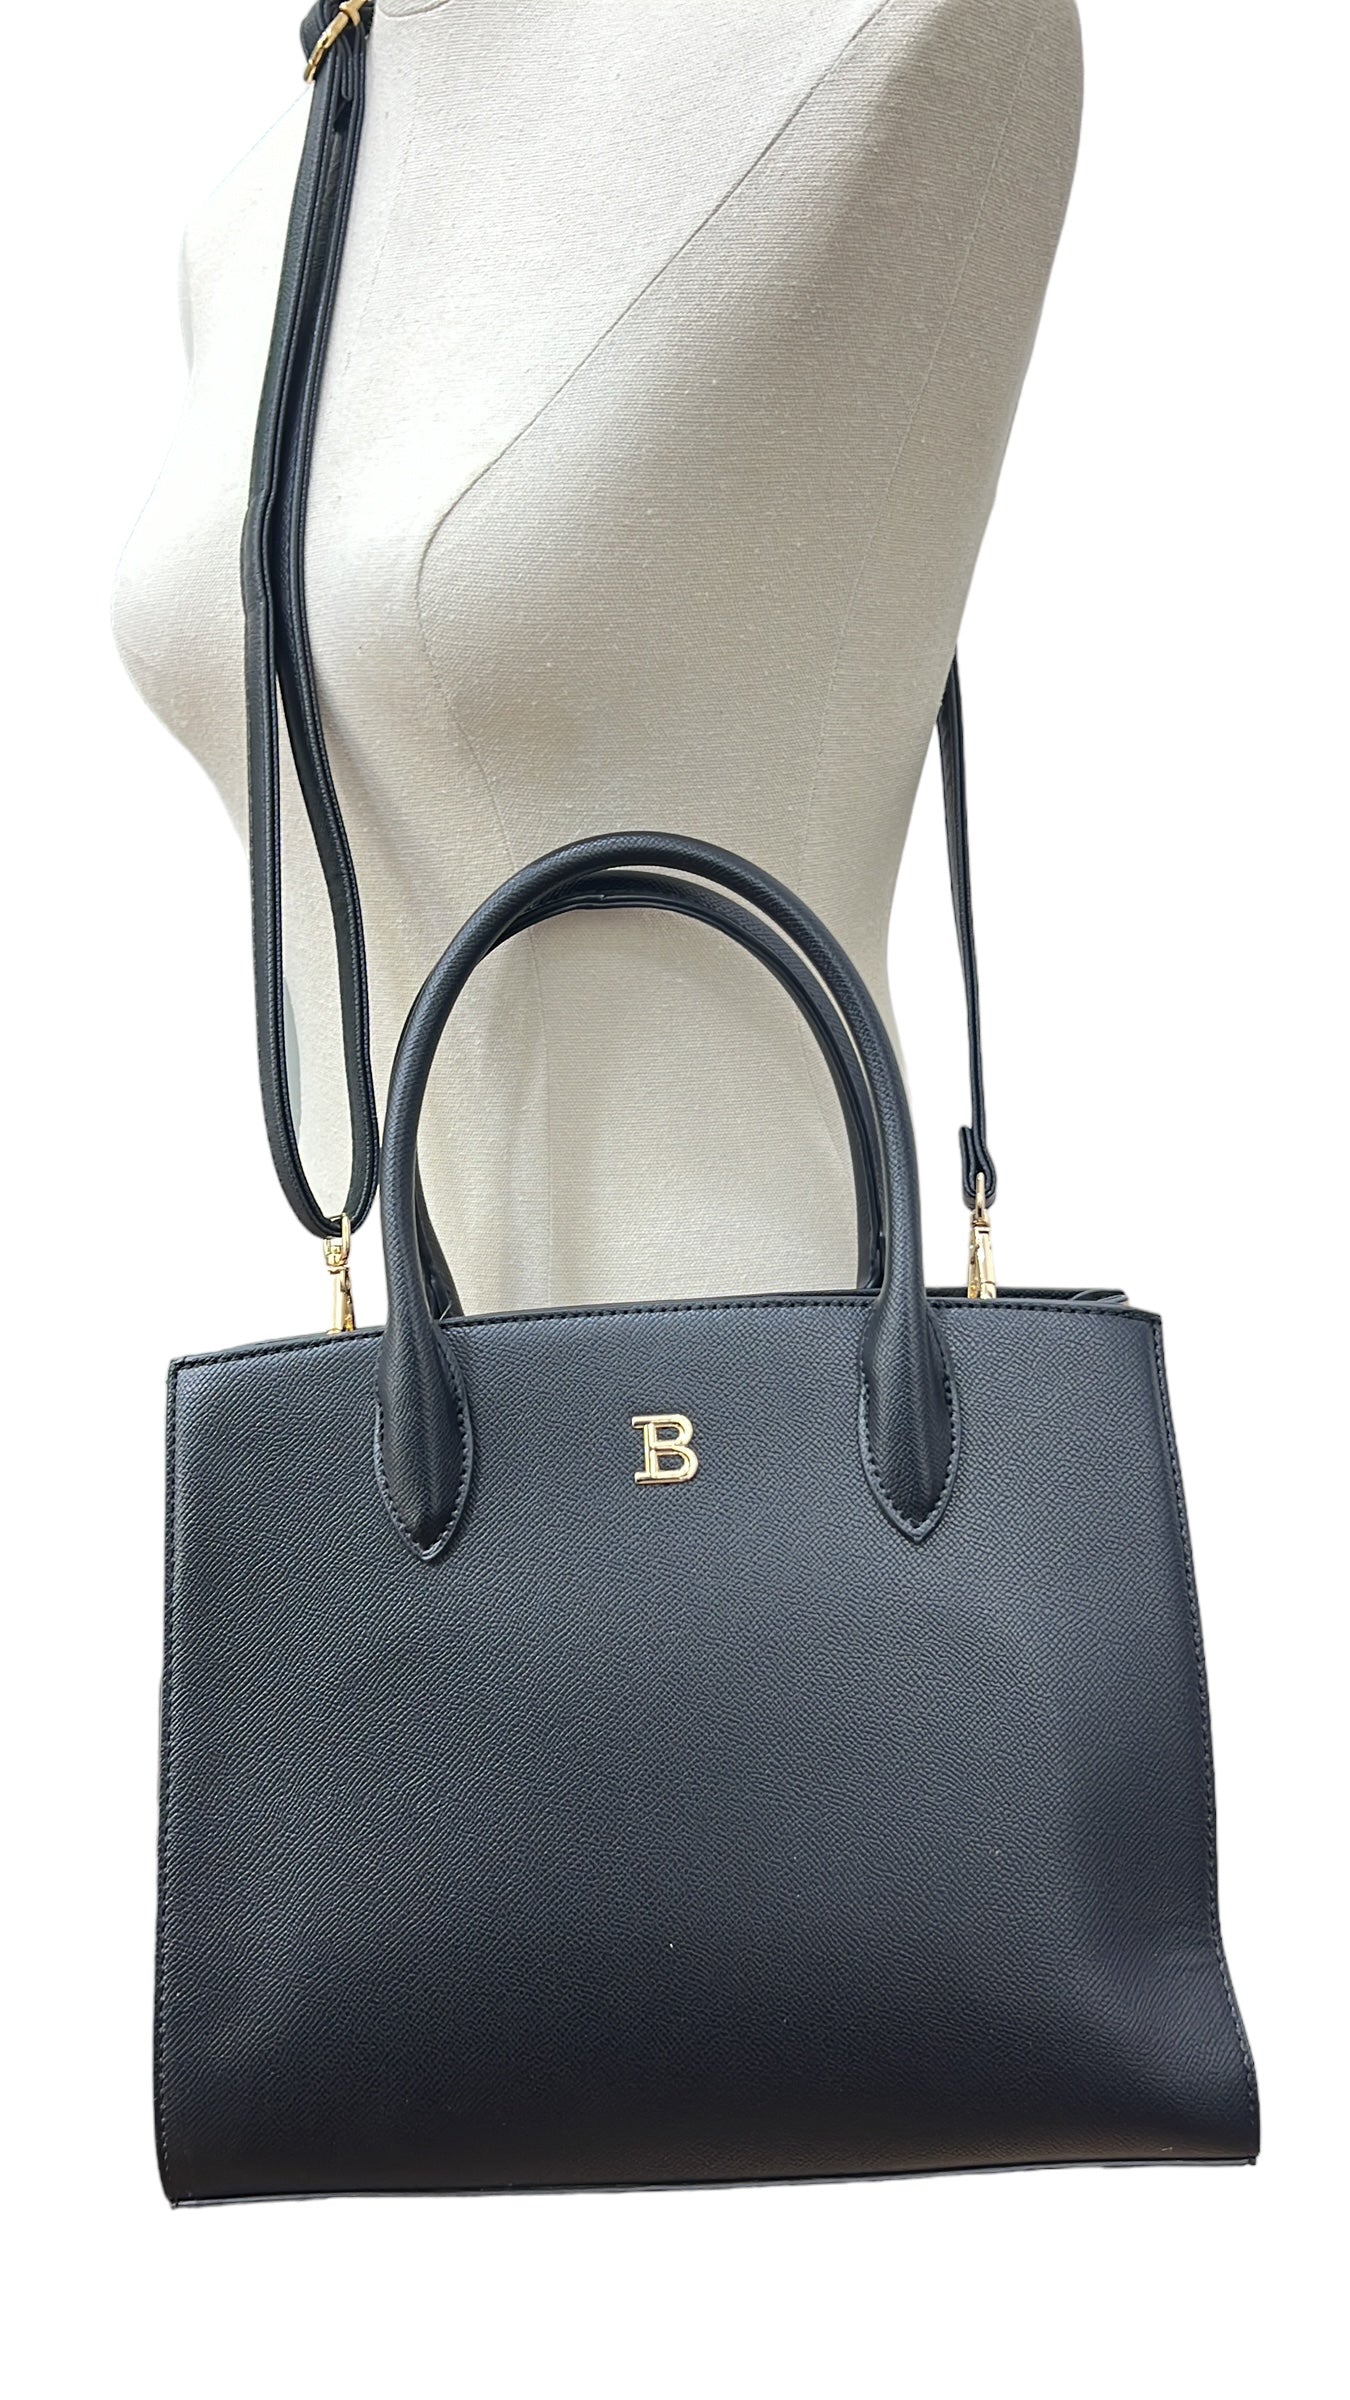 BAGCO TEXTURED STRUCTURED BAG IN BLACK